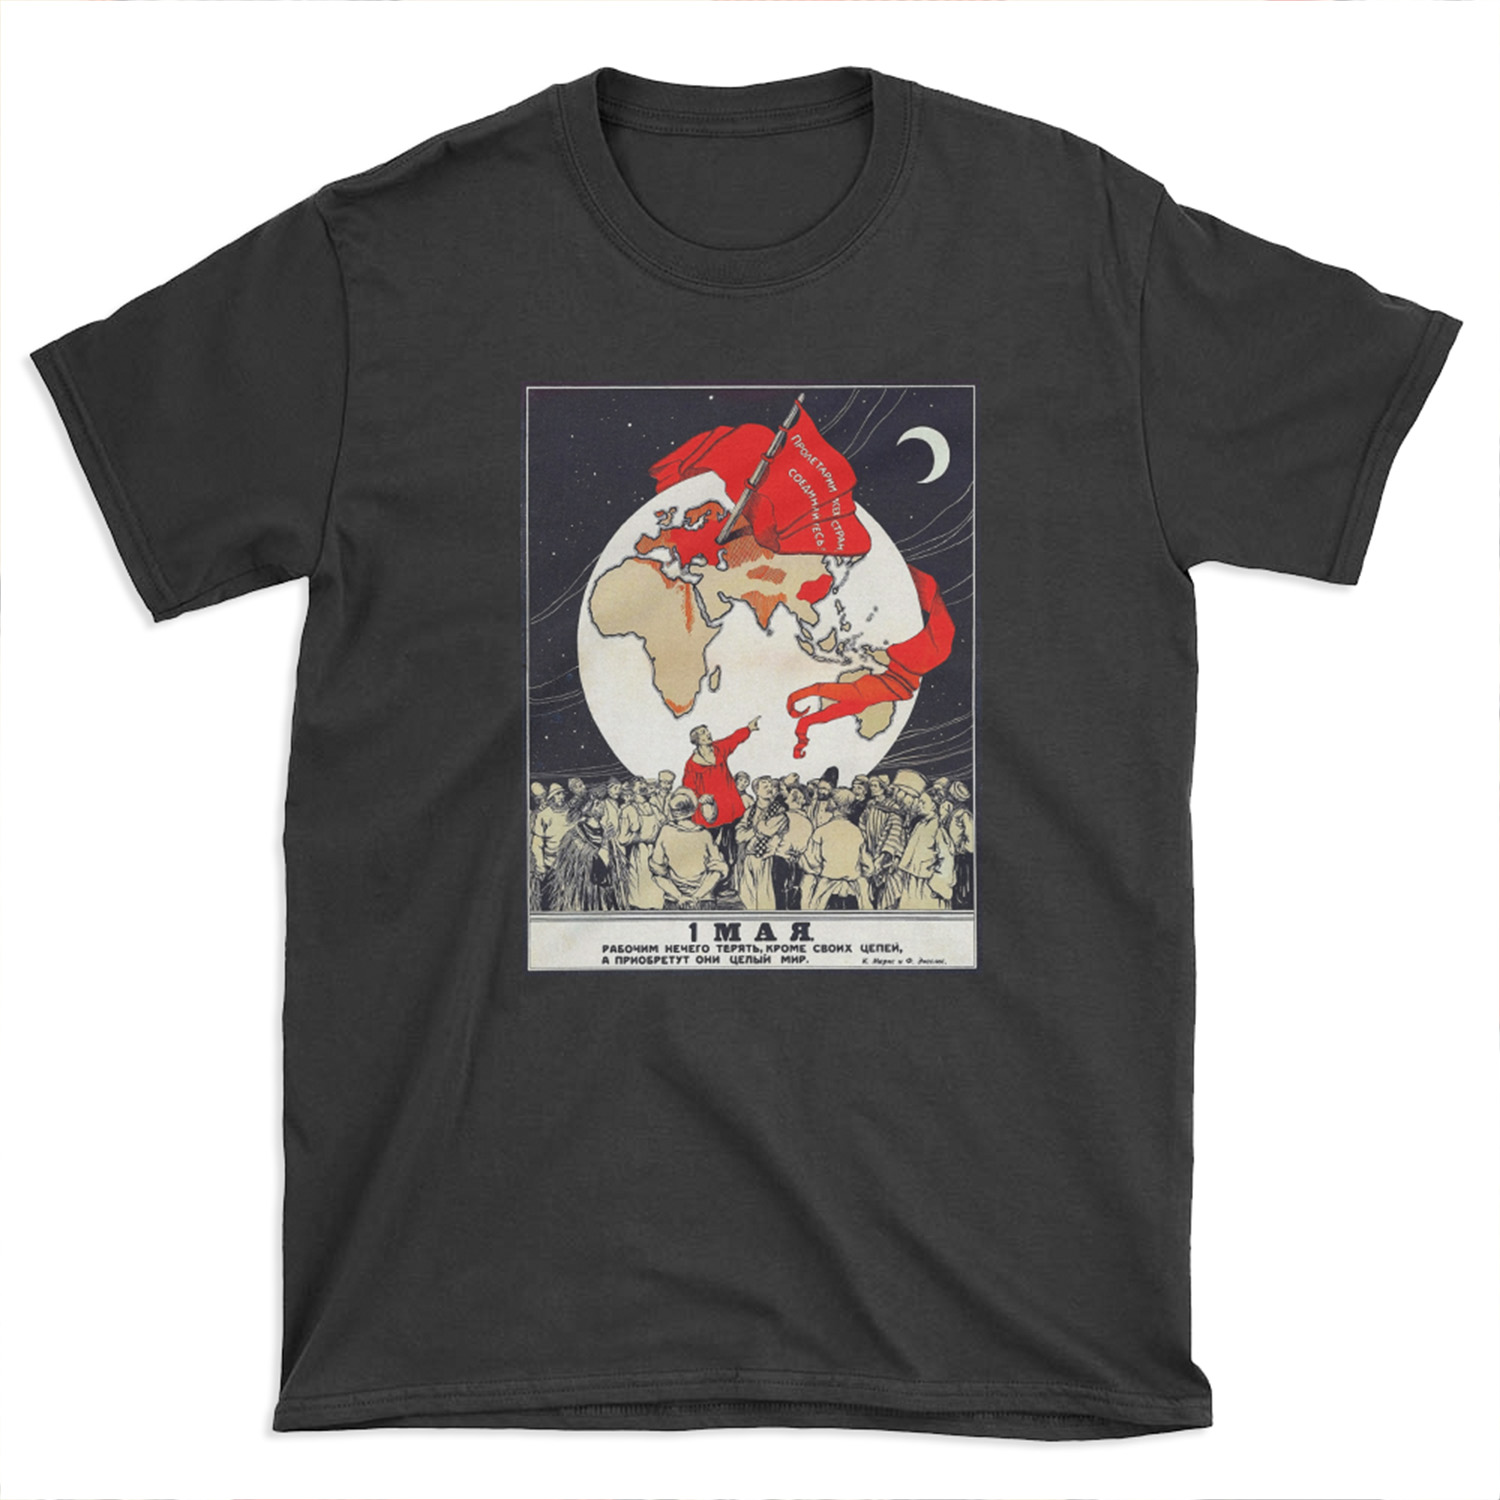 May 1st - Proletarians of all countries unite! T-shirt Tee - Chief T-shirt